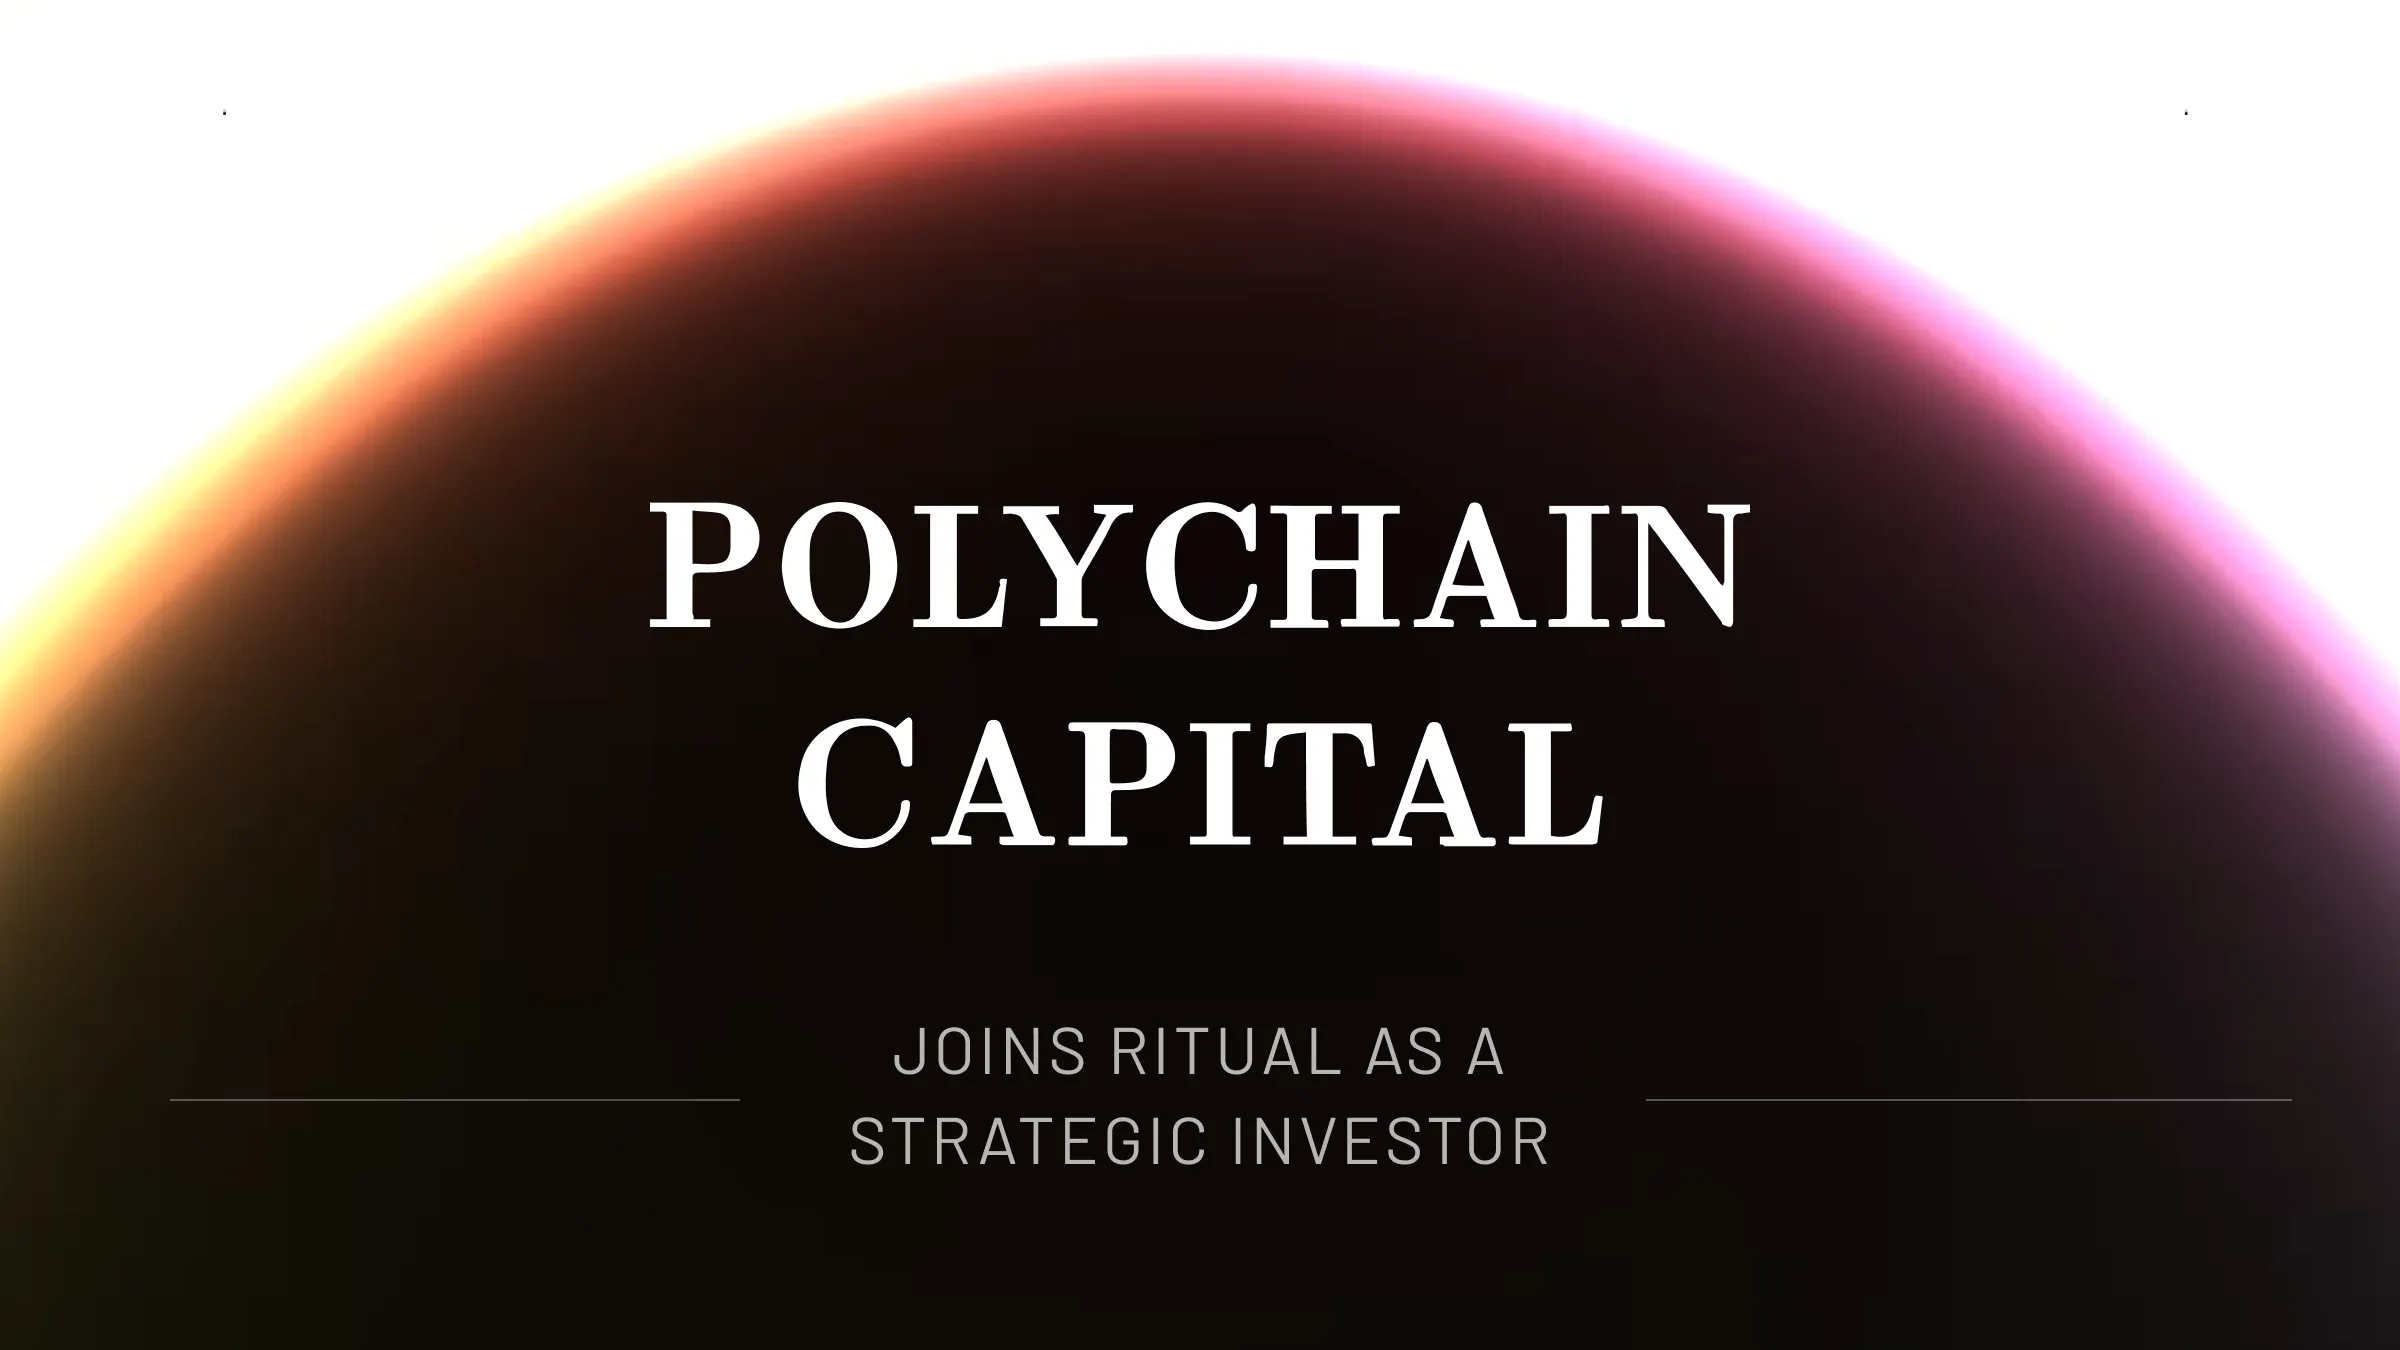 Welcoming Polychain as a Strategic Investor in Ritual